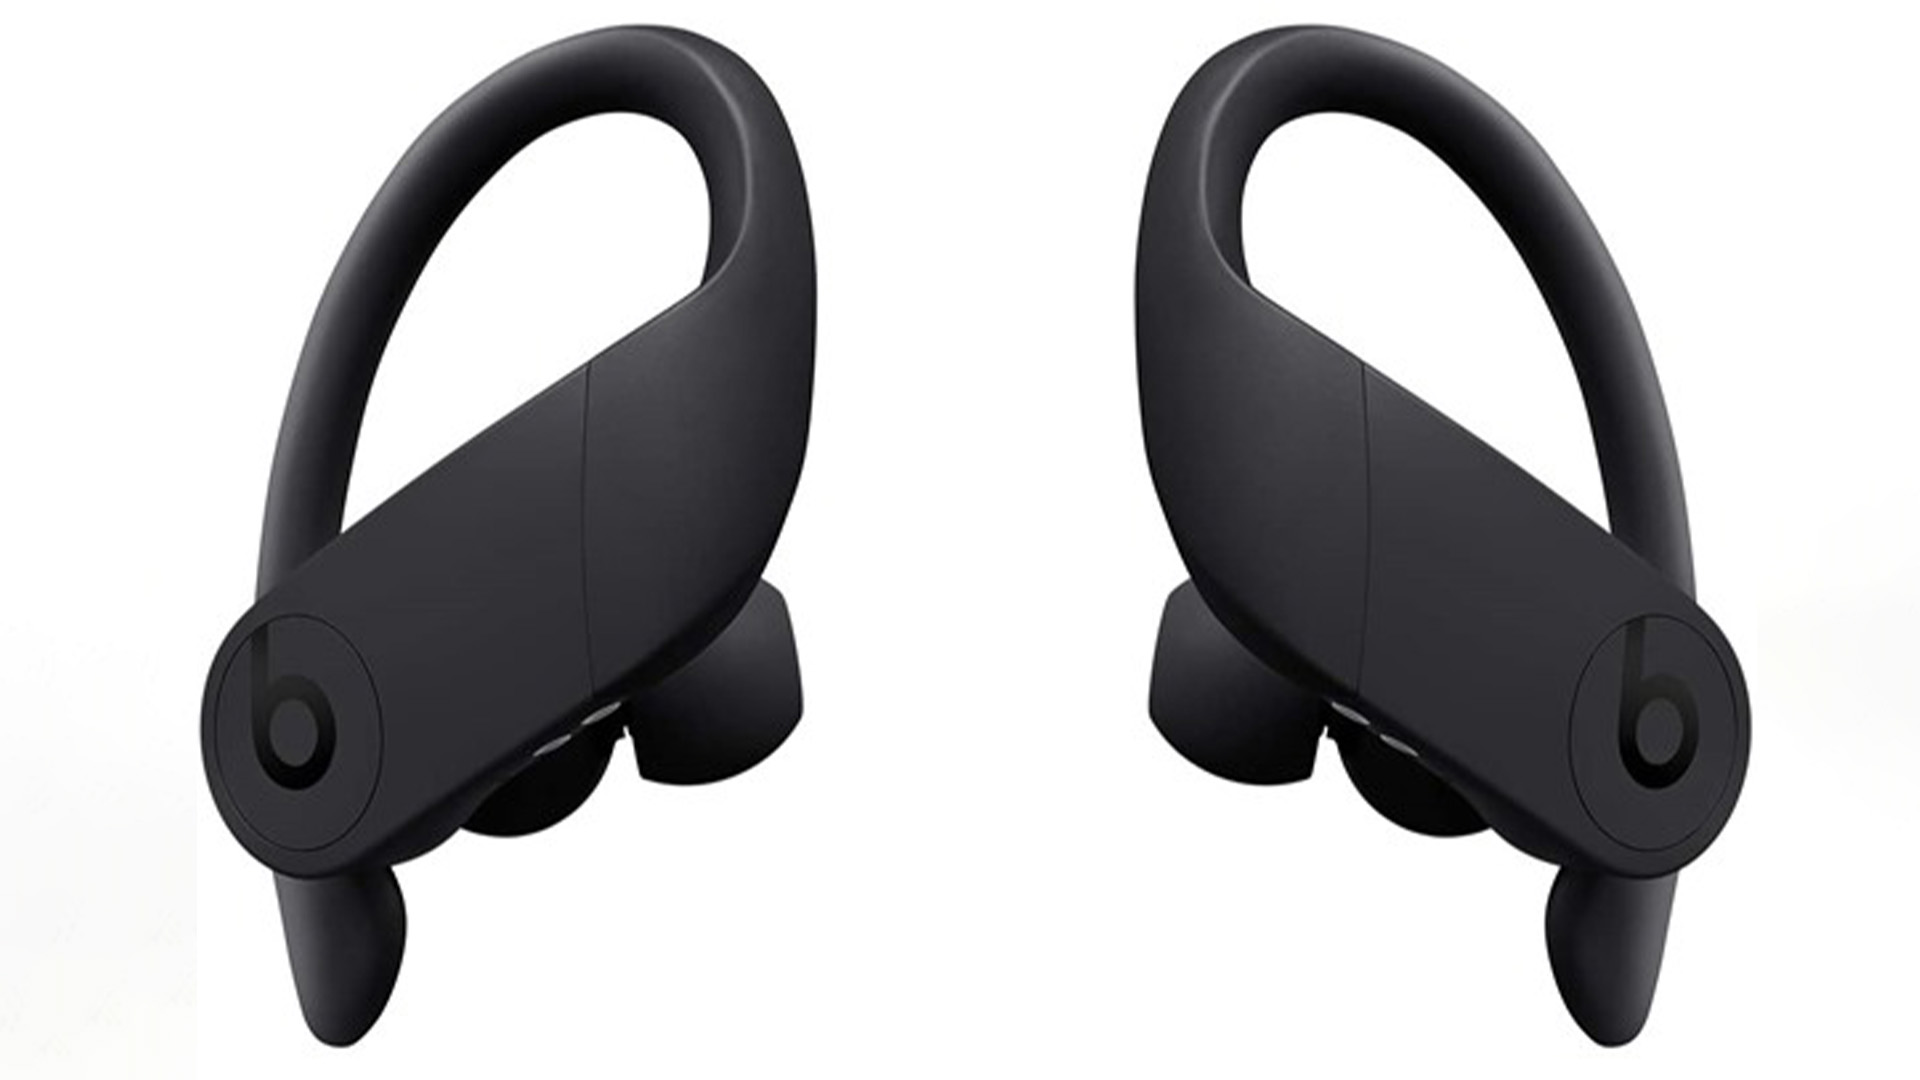 Beats Powerbeats Pro earbuds that rival Apple AirPods down from $250 to $130 in rare Christmas offer…